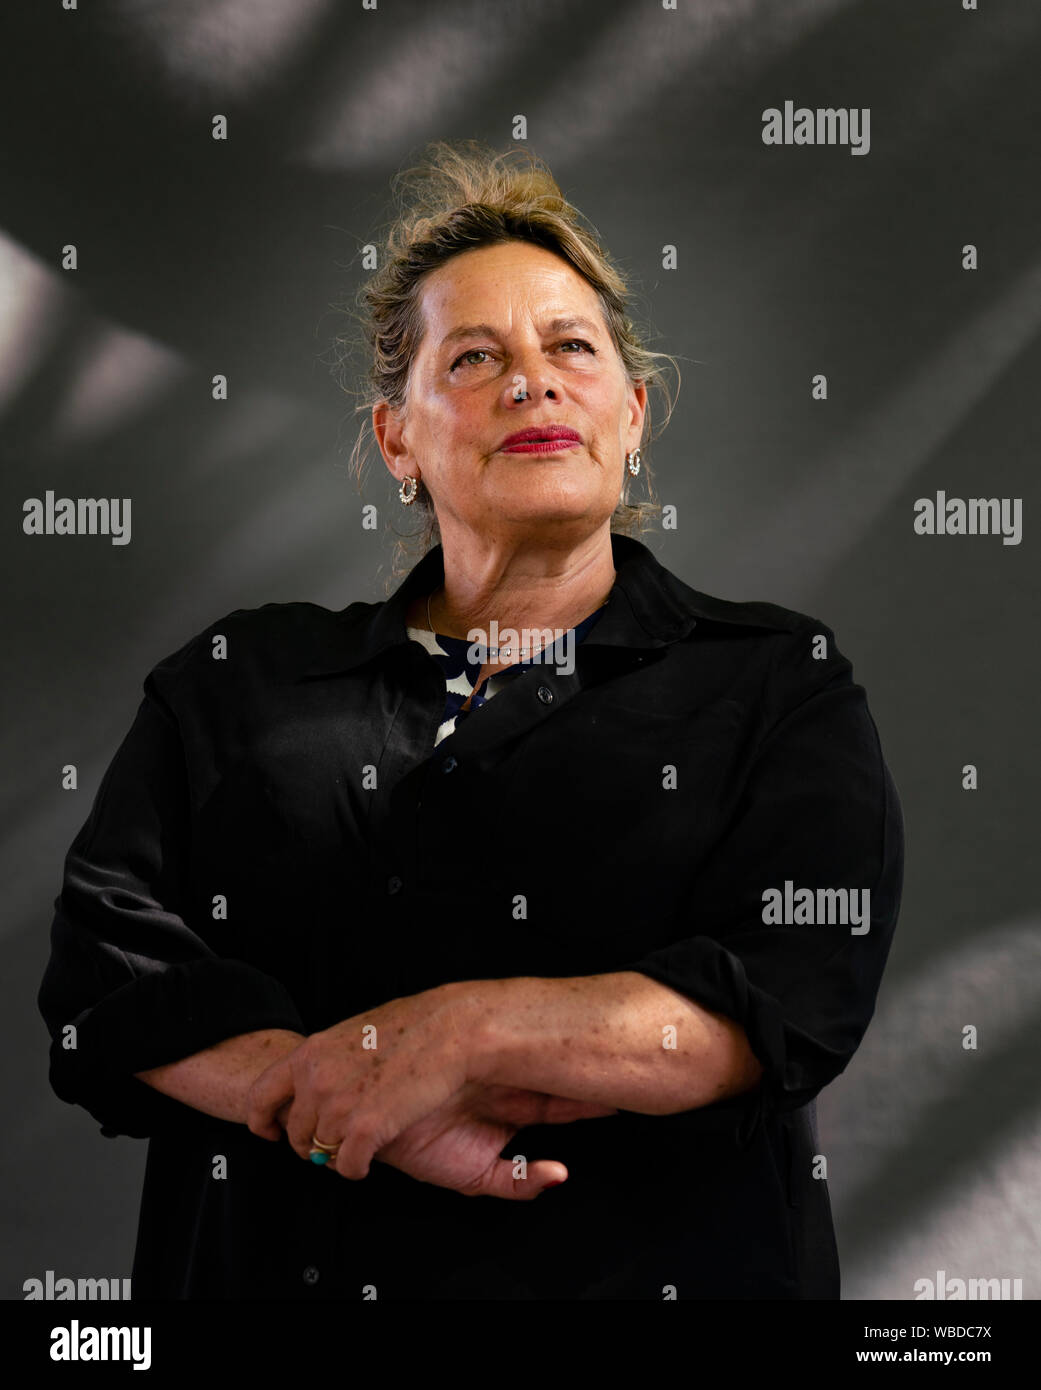 Edinburgh, Scotland, UK. 26 August 2019. Deborah Levy the Booker Prize Long List author. Her new book The man Who Saw Everything, follows young historian Saul Adler to East Berlin in 1989.. Iain Masterton/Alamy Live News. Stock Photo